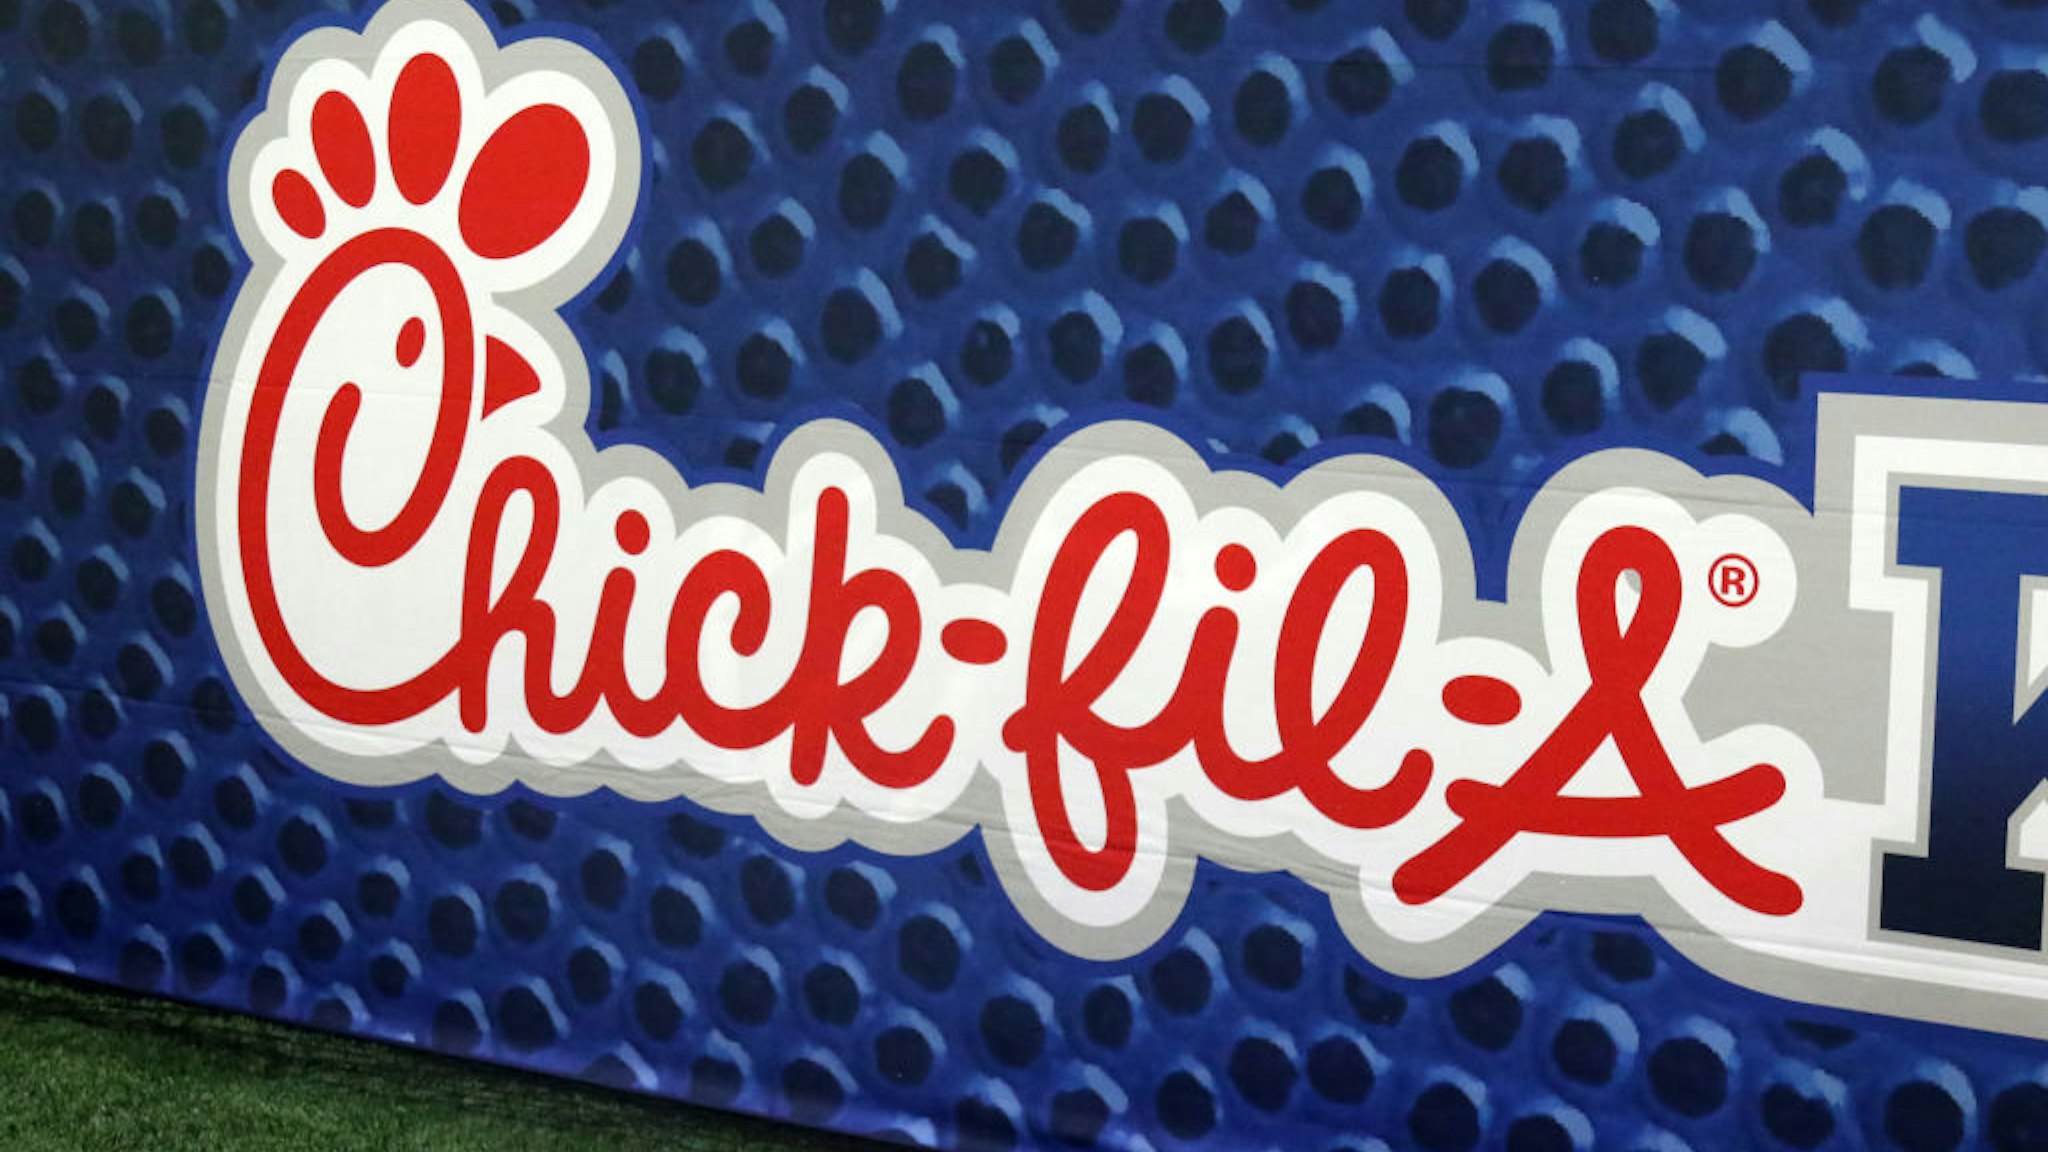 ATLANTA, GA - AUGUST 31: A view of the Chick-fil-A logo at the Chick-fil-A Kickoff Game between the Alabama Crimson Tide and the Duke Blue Devils on August 31, 2019 at Mercedes-Benz Stadium in Atlanta, Georgia.